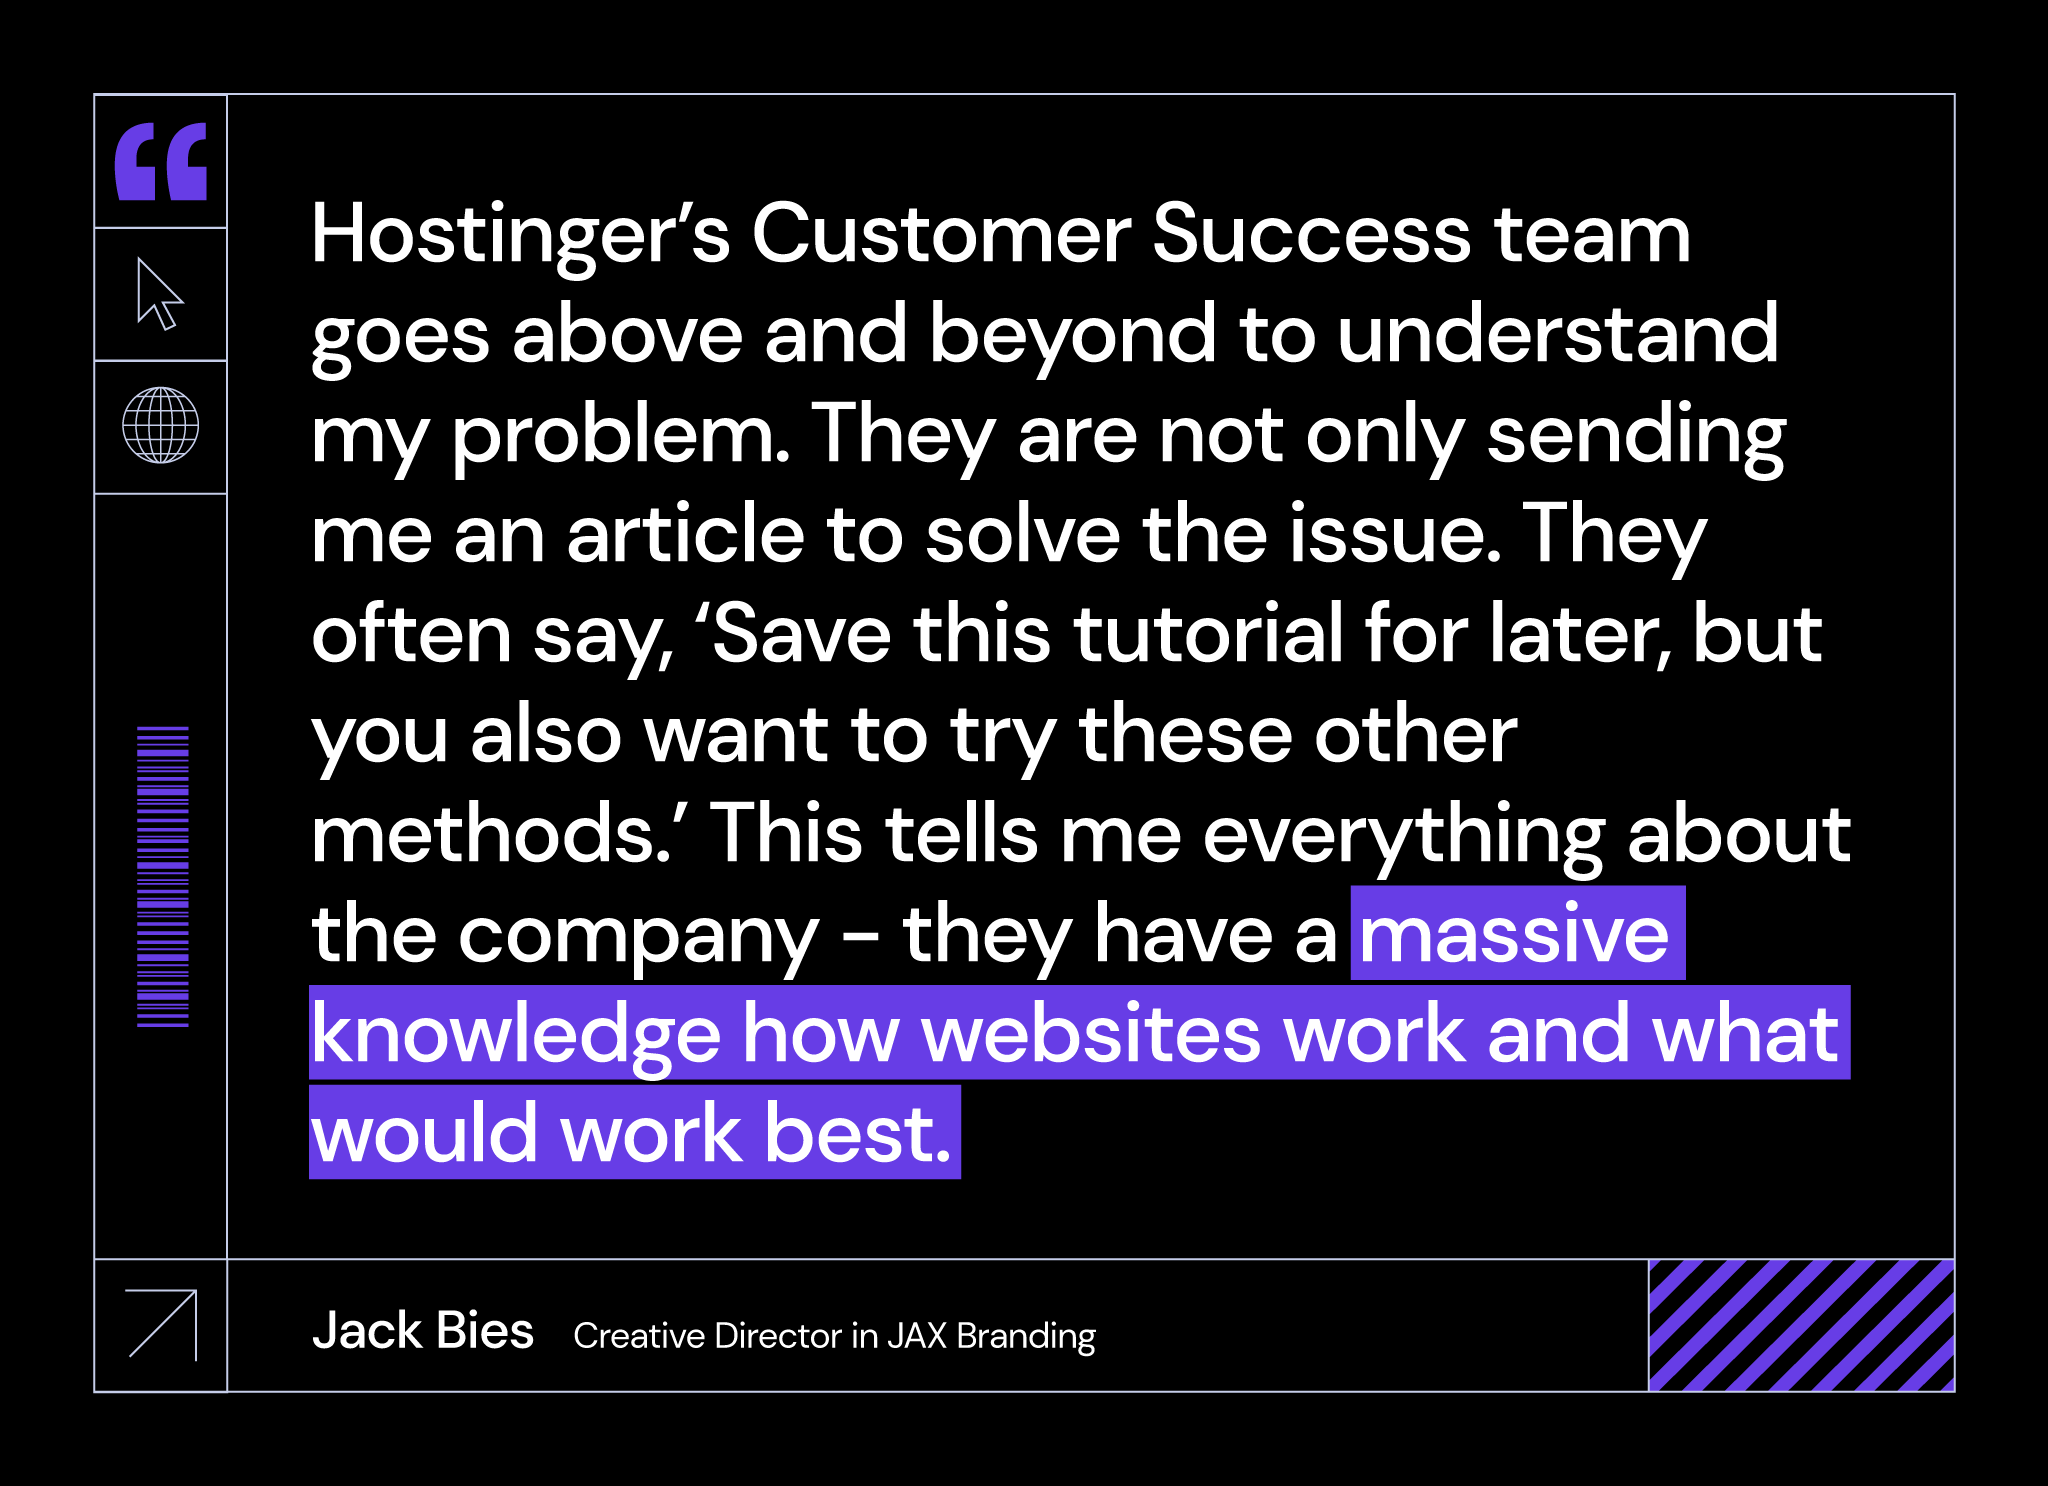 Jack Bies's quote about Hostinger, which says that the company's Customer Success team is highly knowledgeable in its field